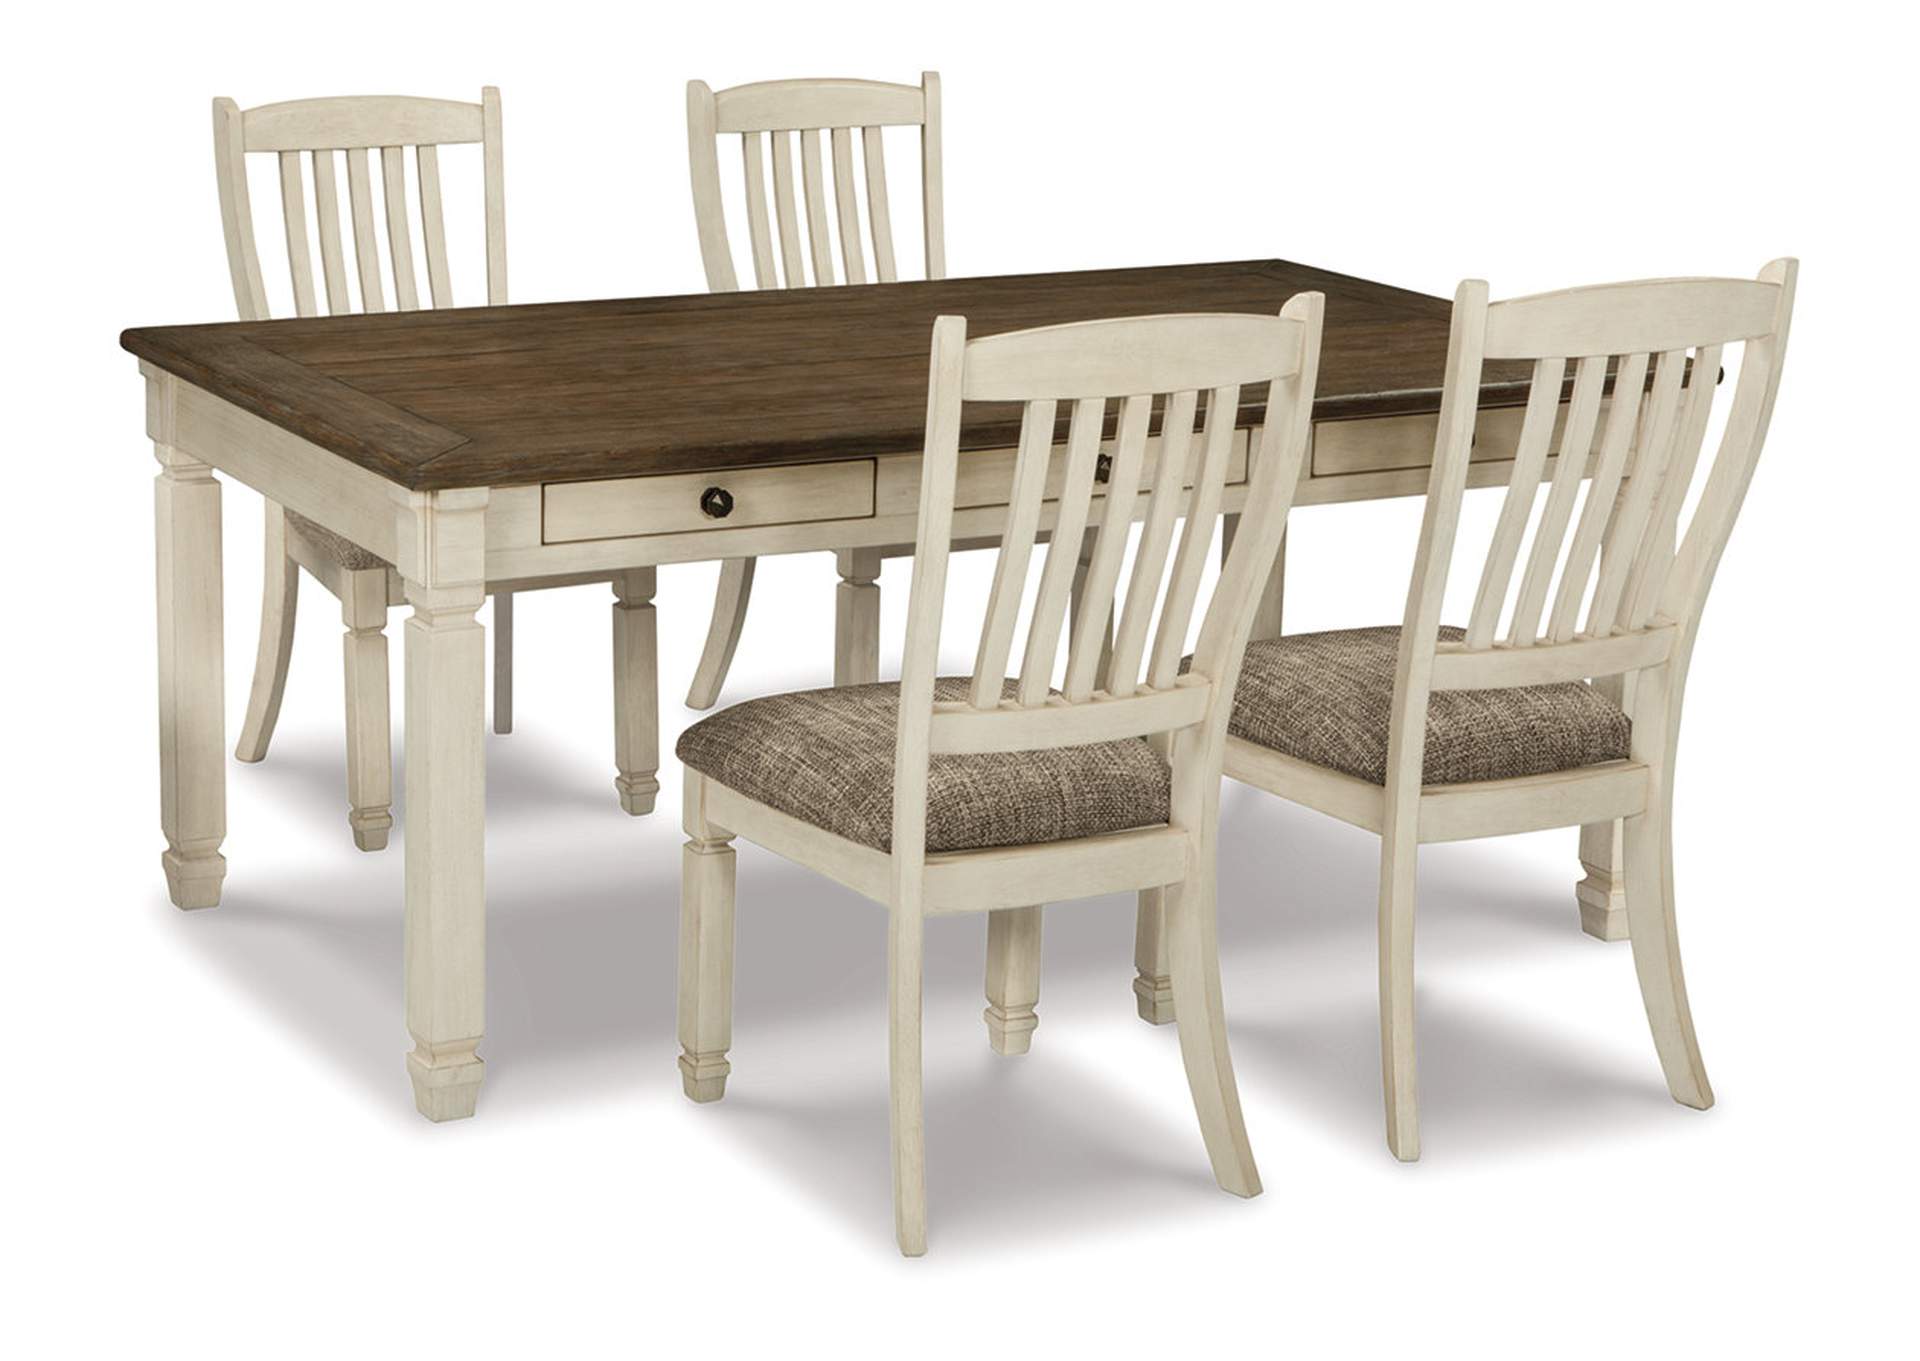 Bolanburg Dining Table and 4 Chairs,Signature Design By Ashley